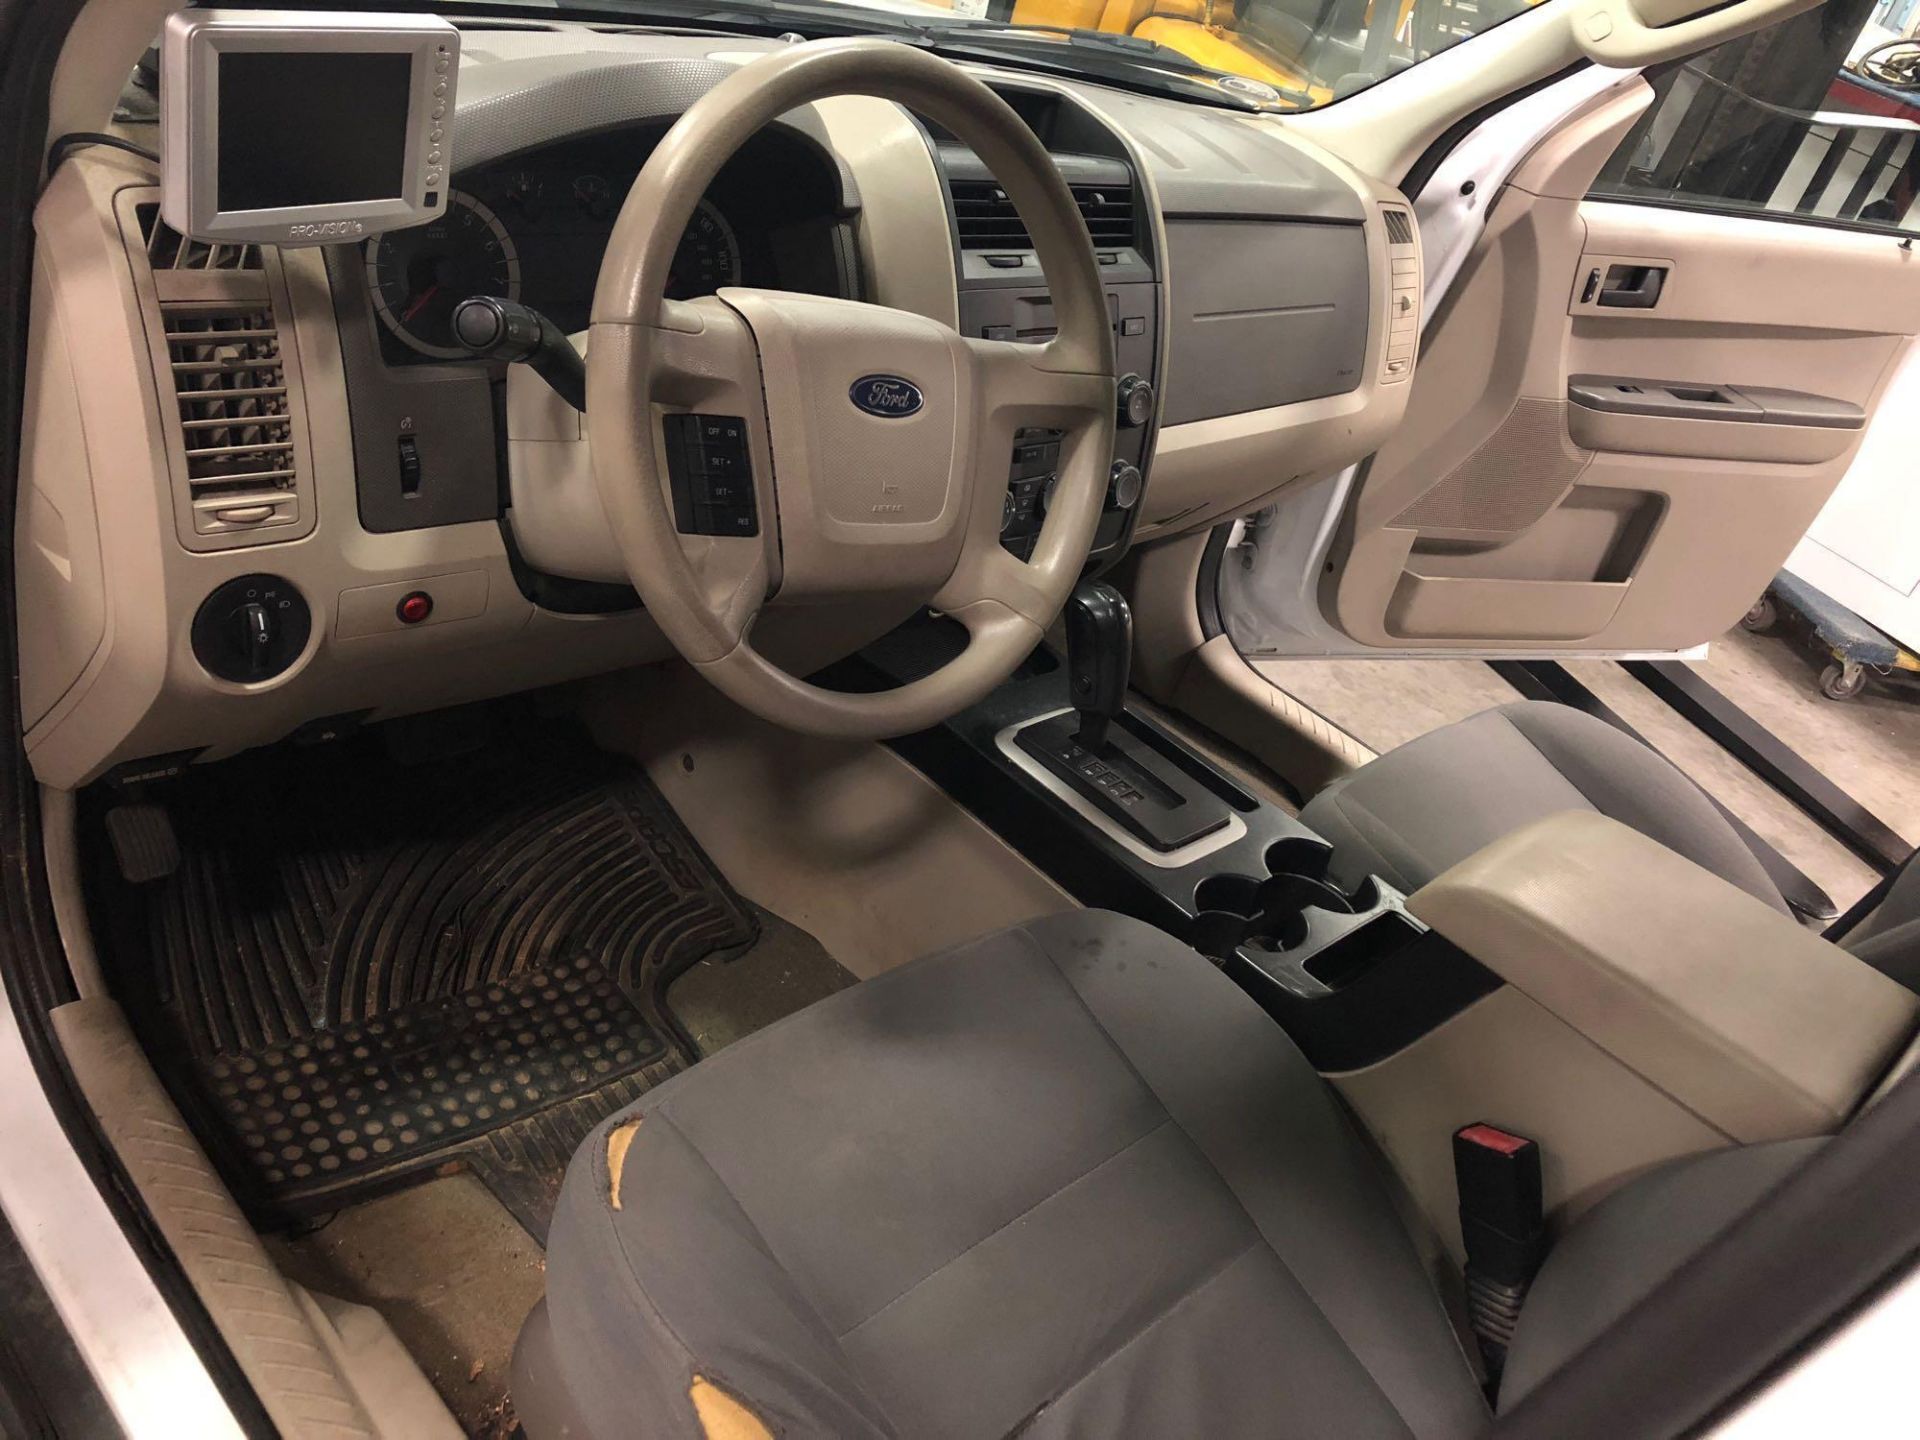 2010 FORD ESCAPE SUV, 4 DOOR, AUTOMATIC TRANSMISSION, RUNS - Image 13 of 17